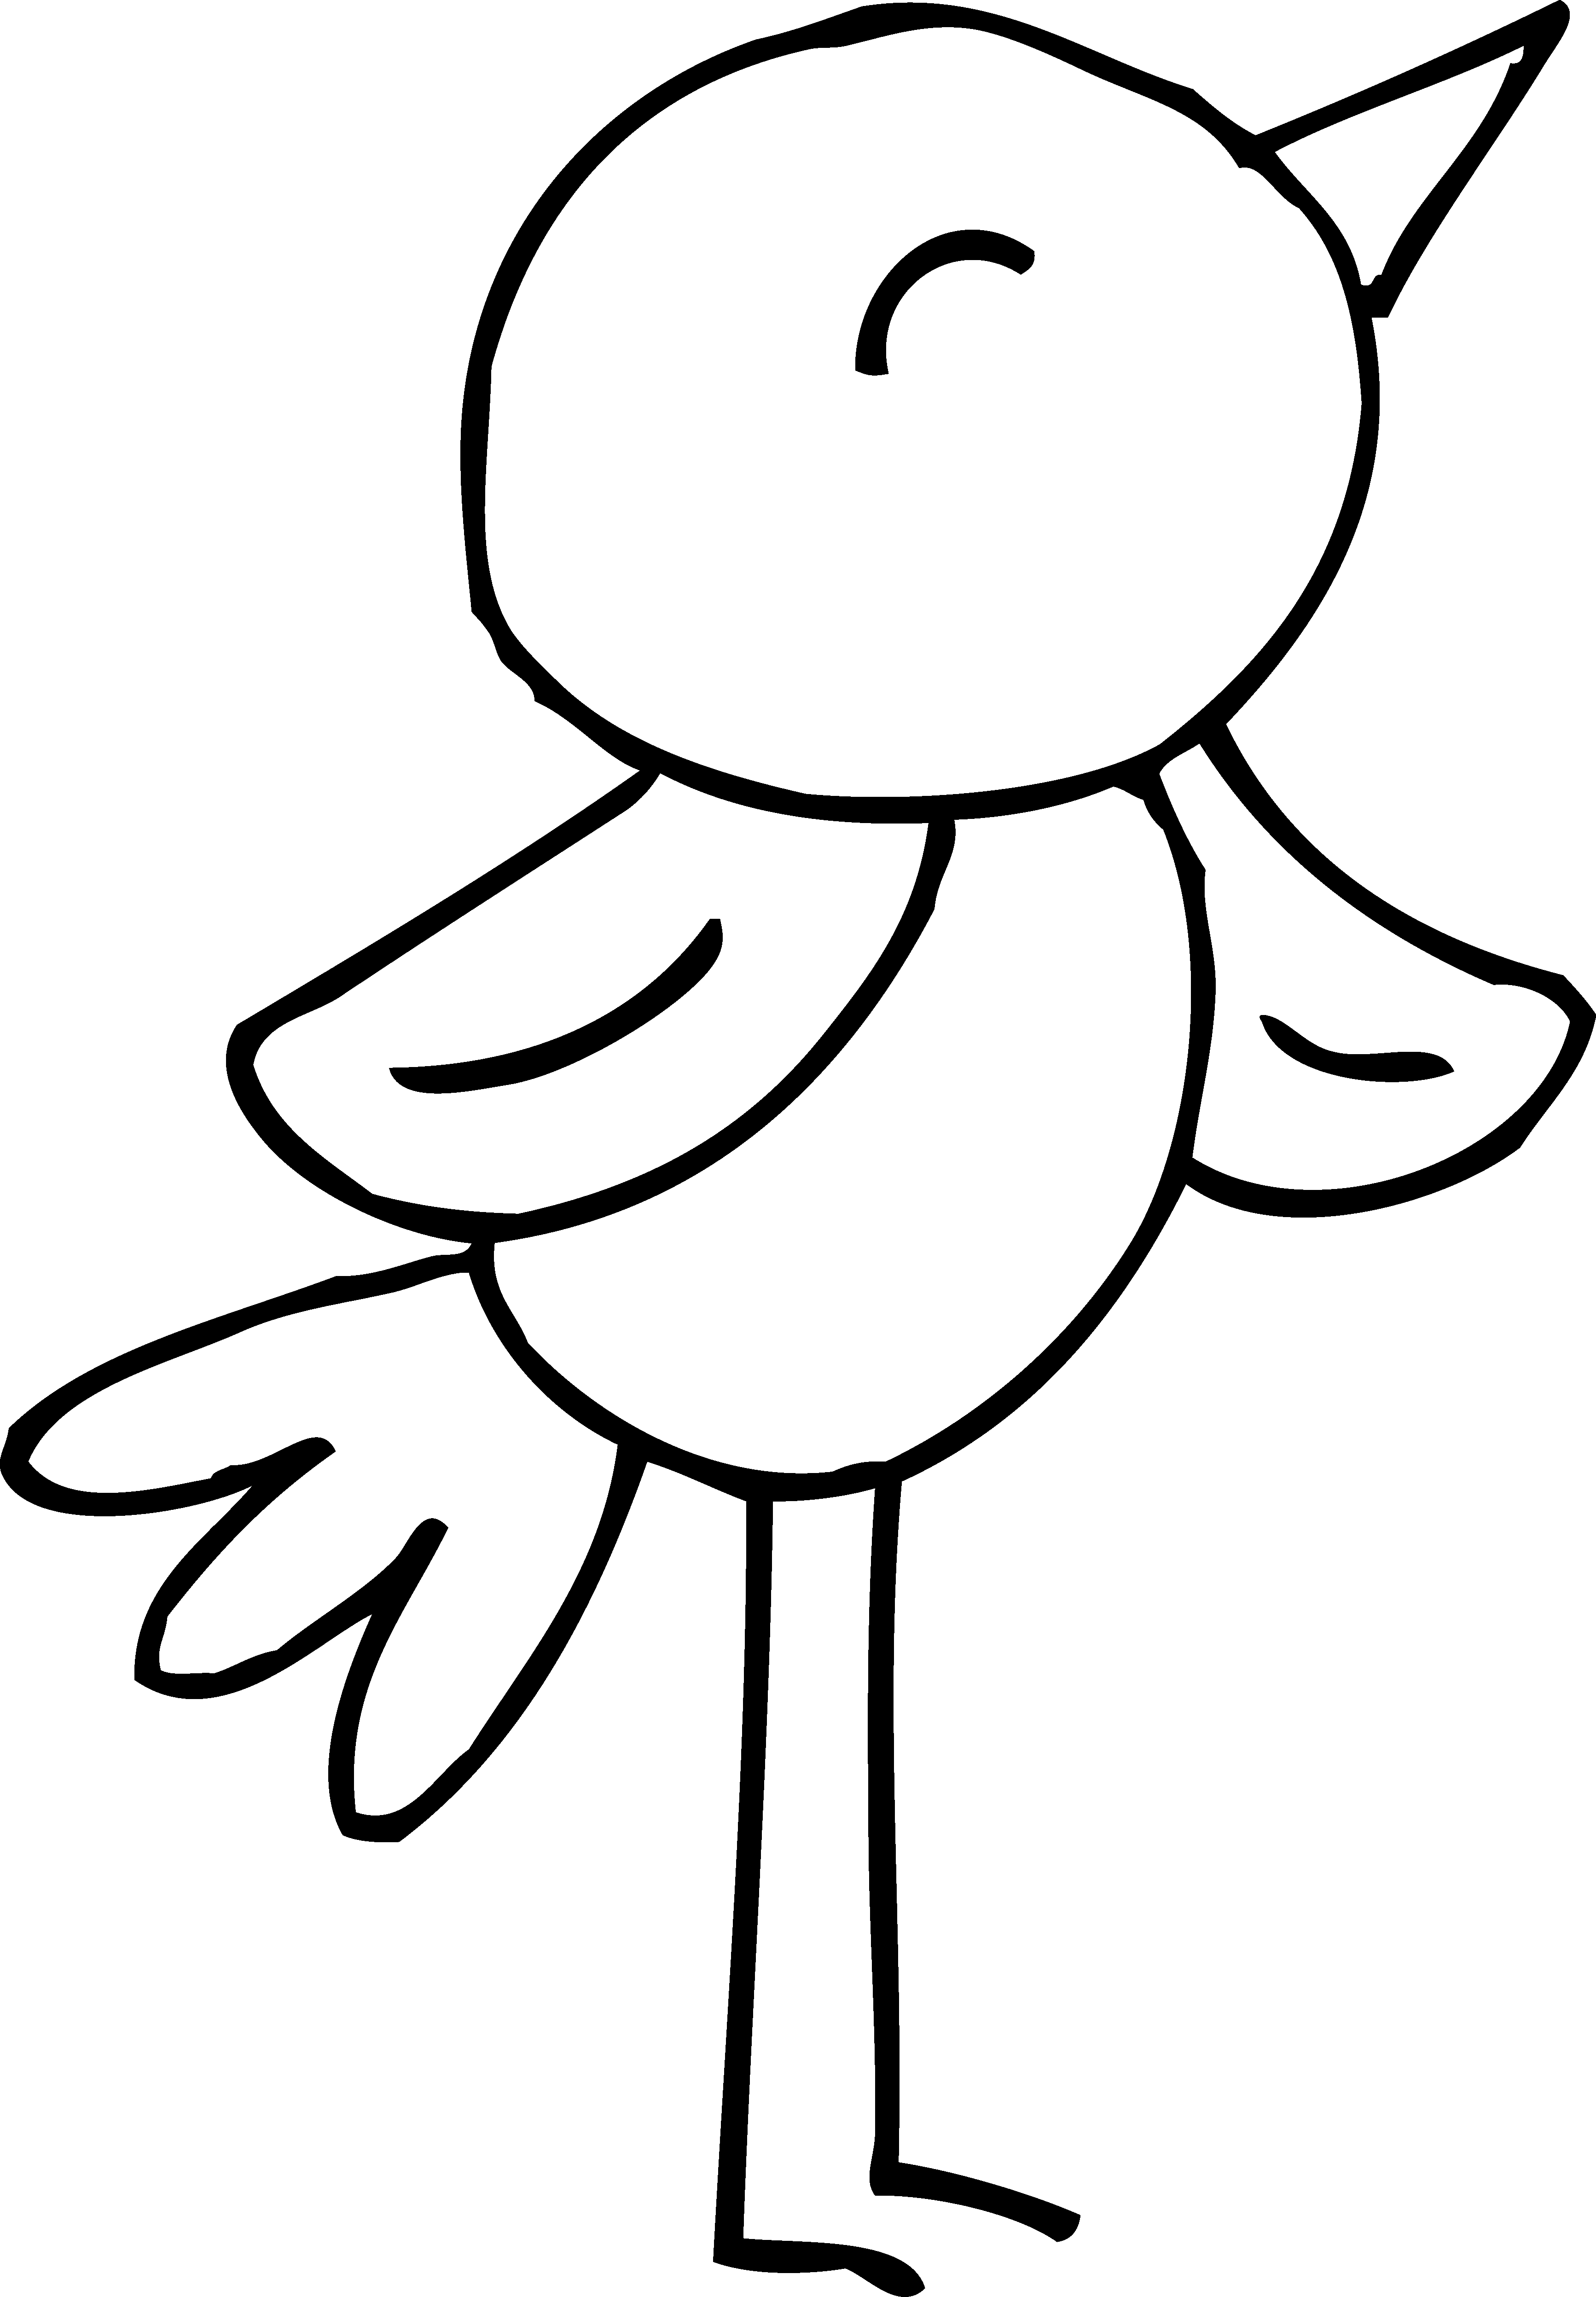 free bird clipart black and white